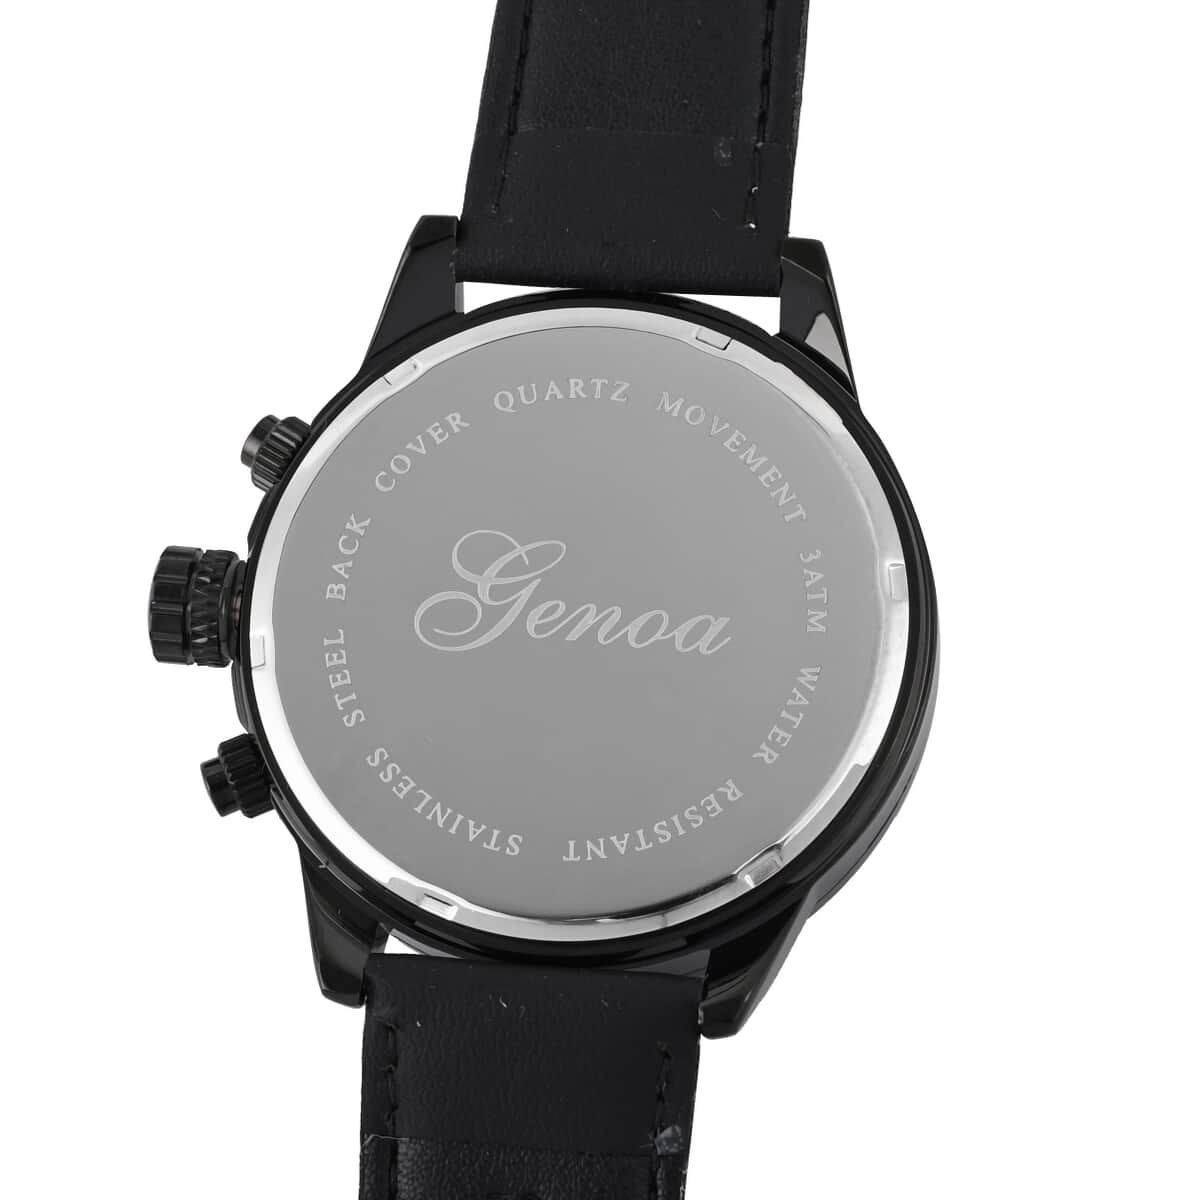 Genoa Multifunctional Quartz Movement Watch with Black Leather Strap (47mm) (5.25-7.25 Inches) image number 6